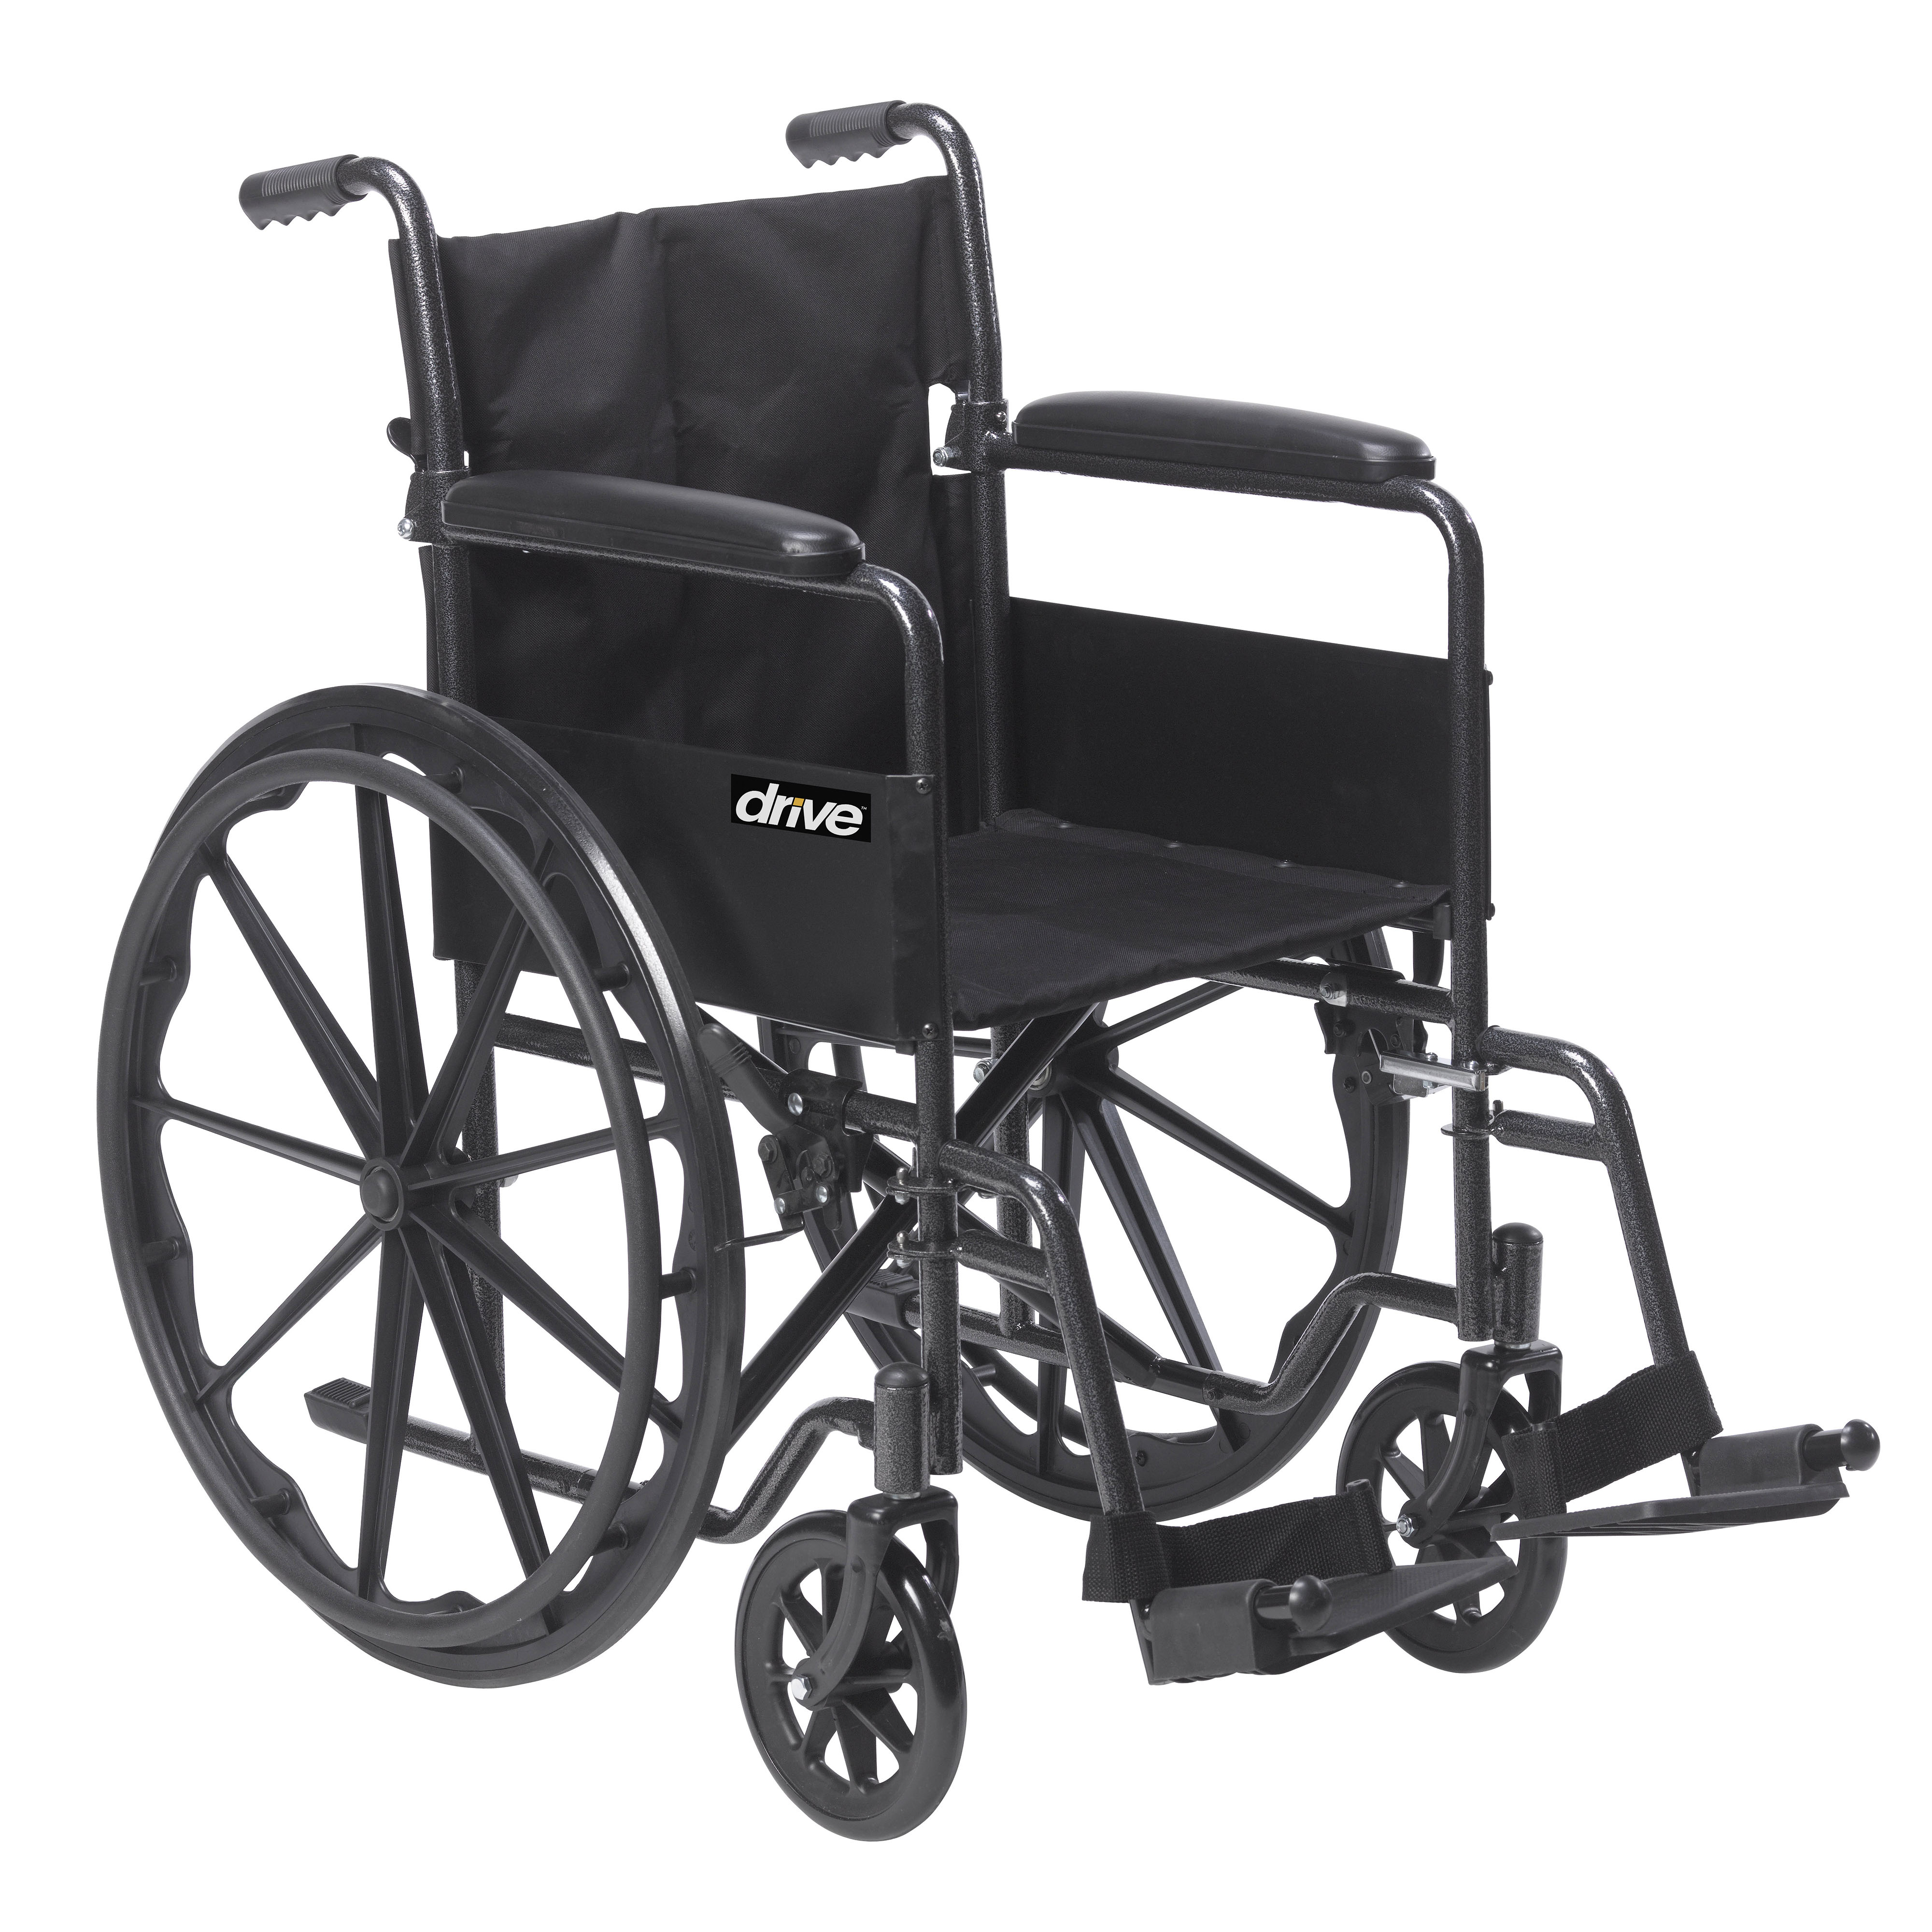 Drive Medical Silver Sport 1 Wheelchair with Full Arms and Swing away Removable Footrest - image 1 of 6